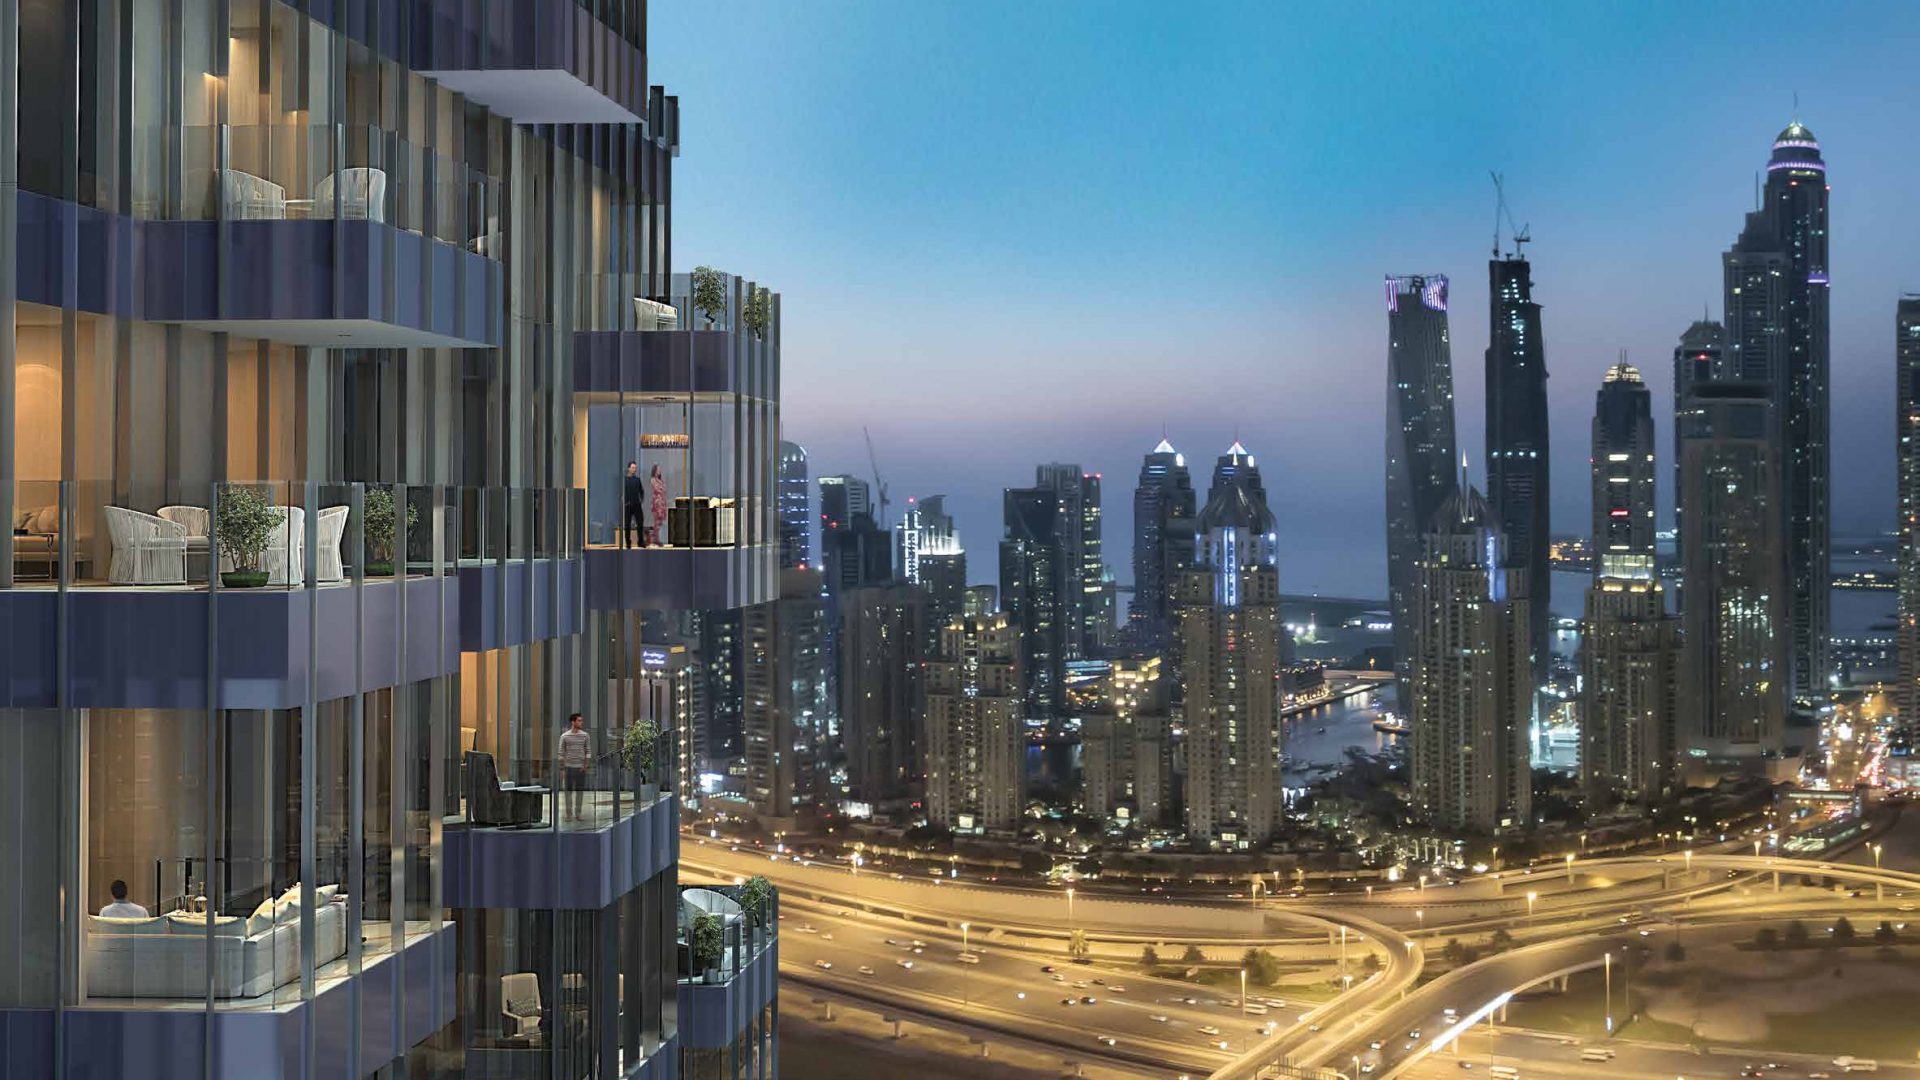 The Residences JLT is a grand residential project by Signature Developers located in the Jumeirah Lakes Towers